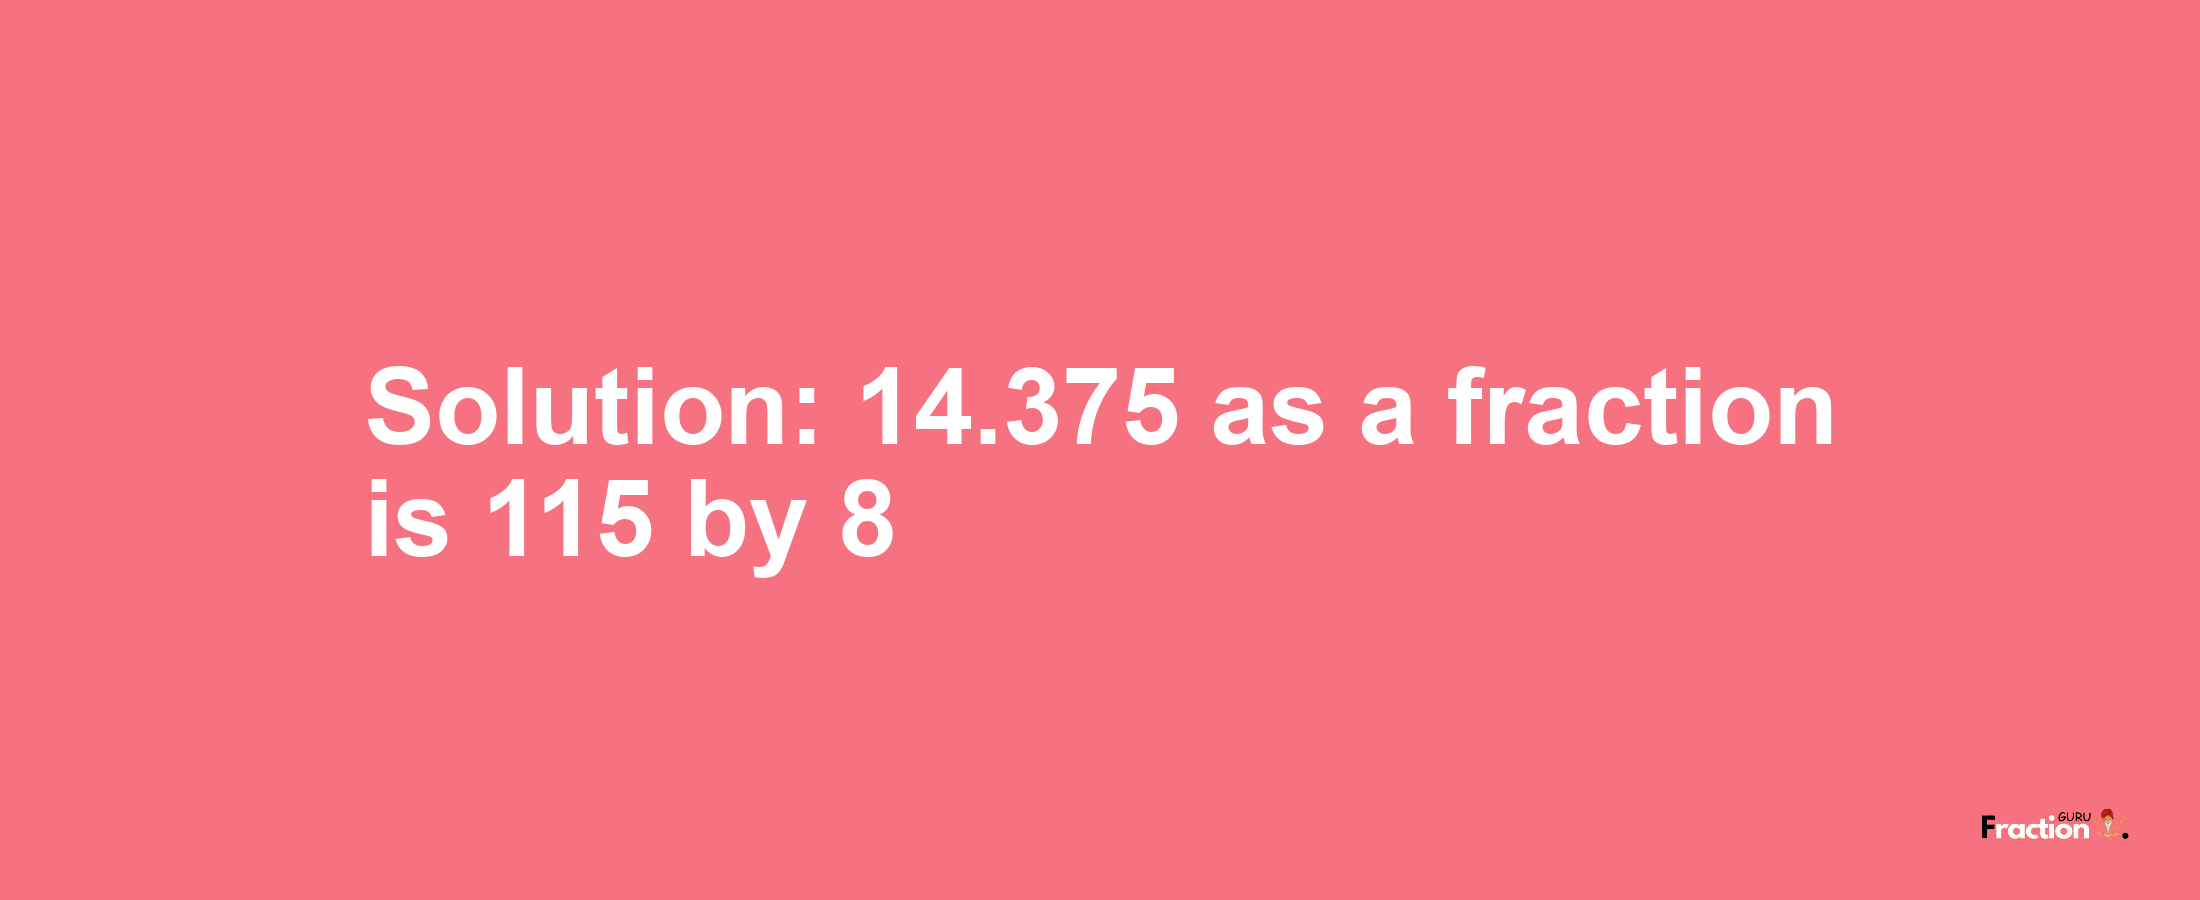 Solution:14.375 as a fraction is 115/8